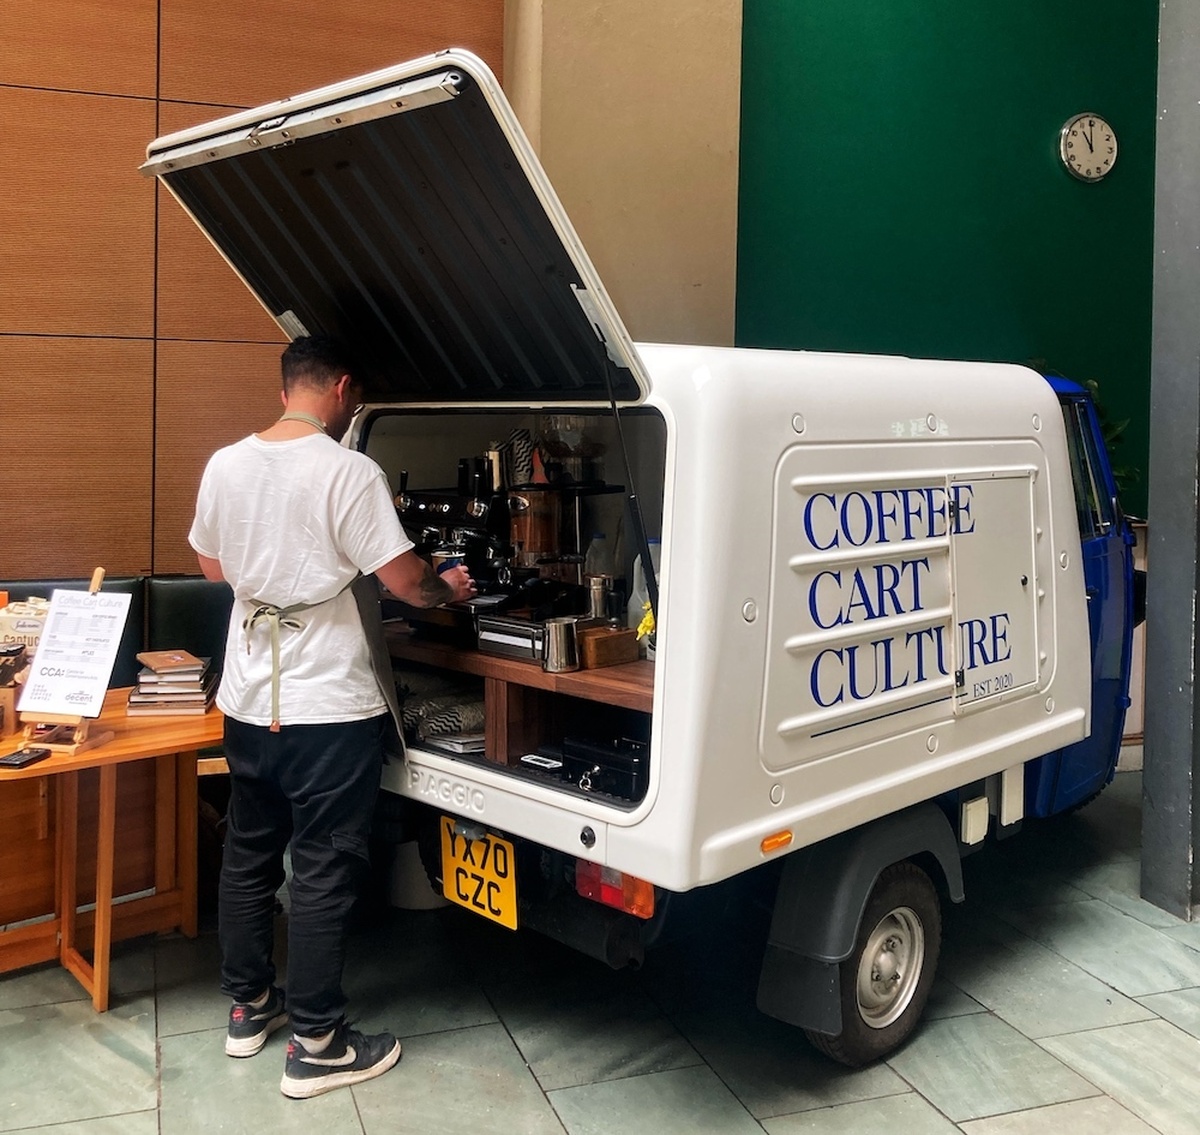 A person stands at a mobile coffee cart situated in CCA's Courtyard.